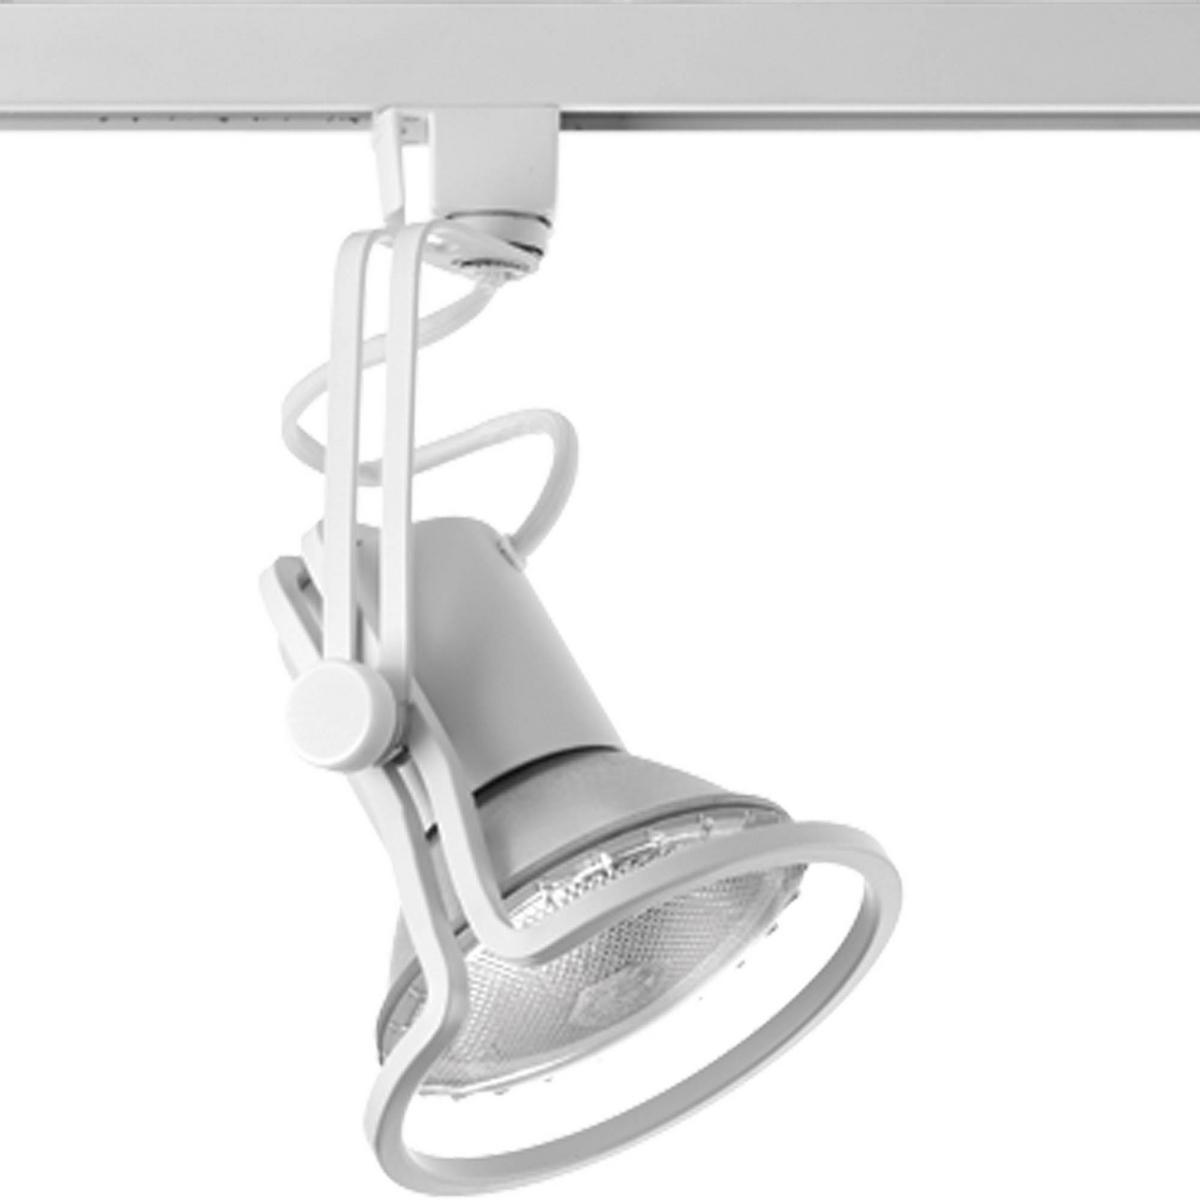 Hubbell P6329-28 White free form Alpha Trak track head with 360 degree horizontal rotation and 90 degree vertical rotation. Excellent for both residential and retail locations. Use one 75W PAR 30 short neck bulb.  ; White finish. ; For use with Alpha (P9100 series) track.